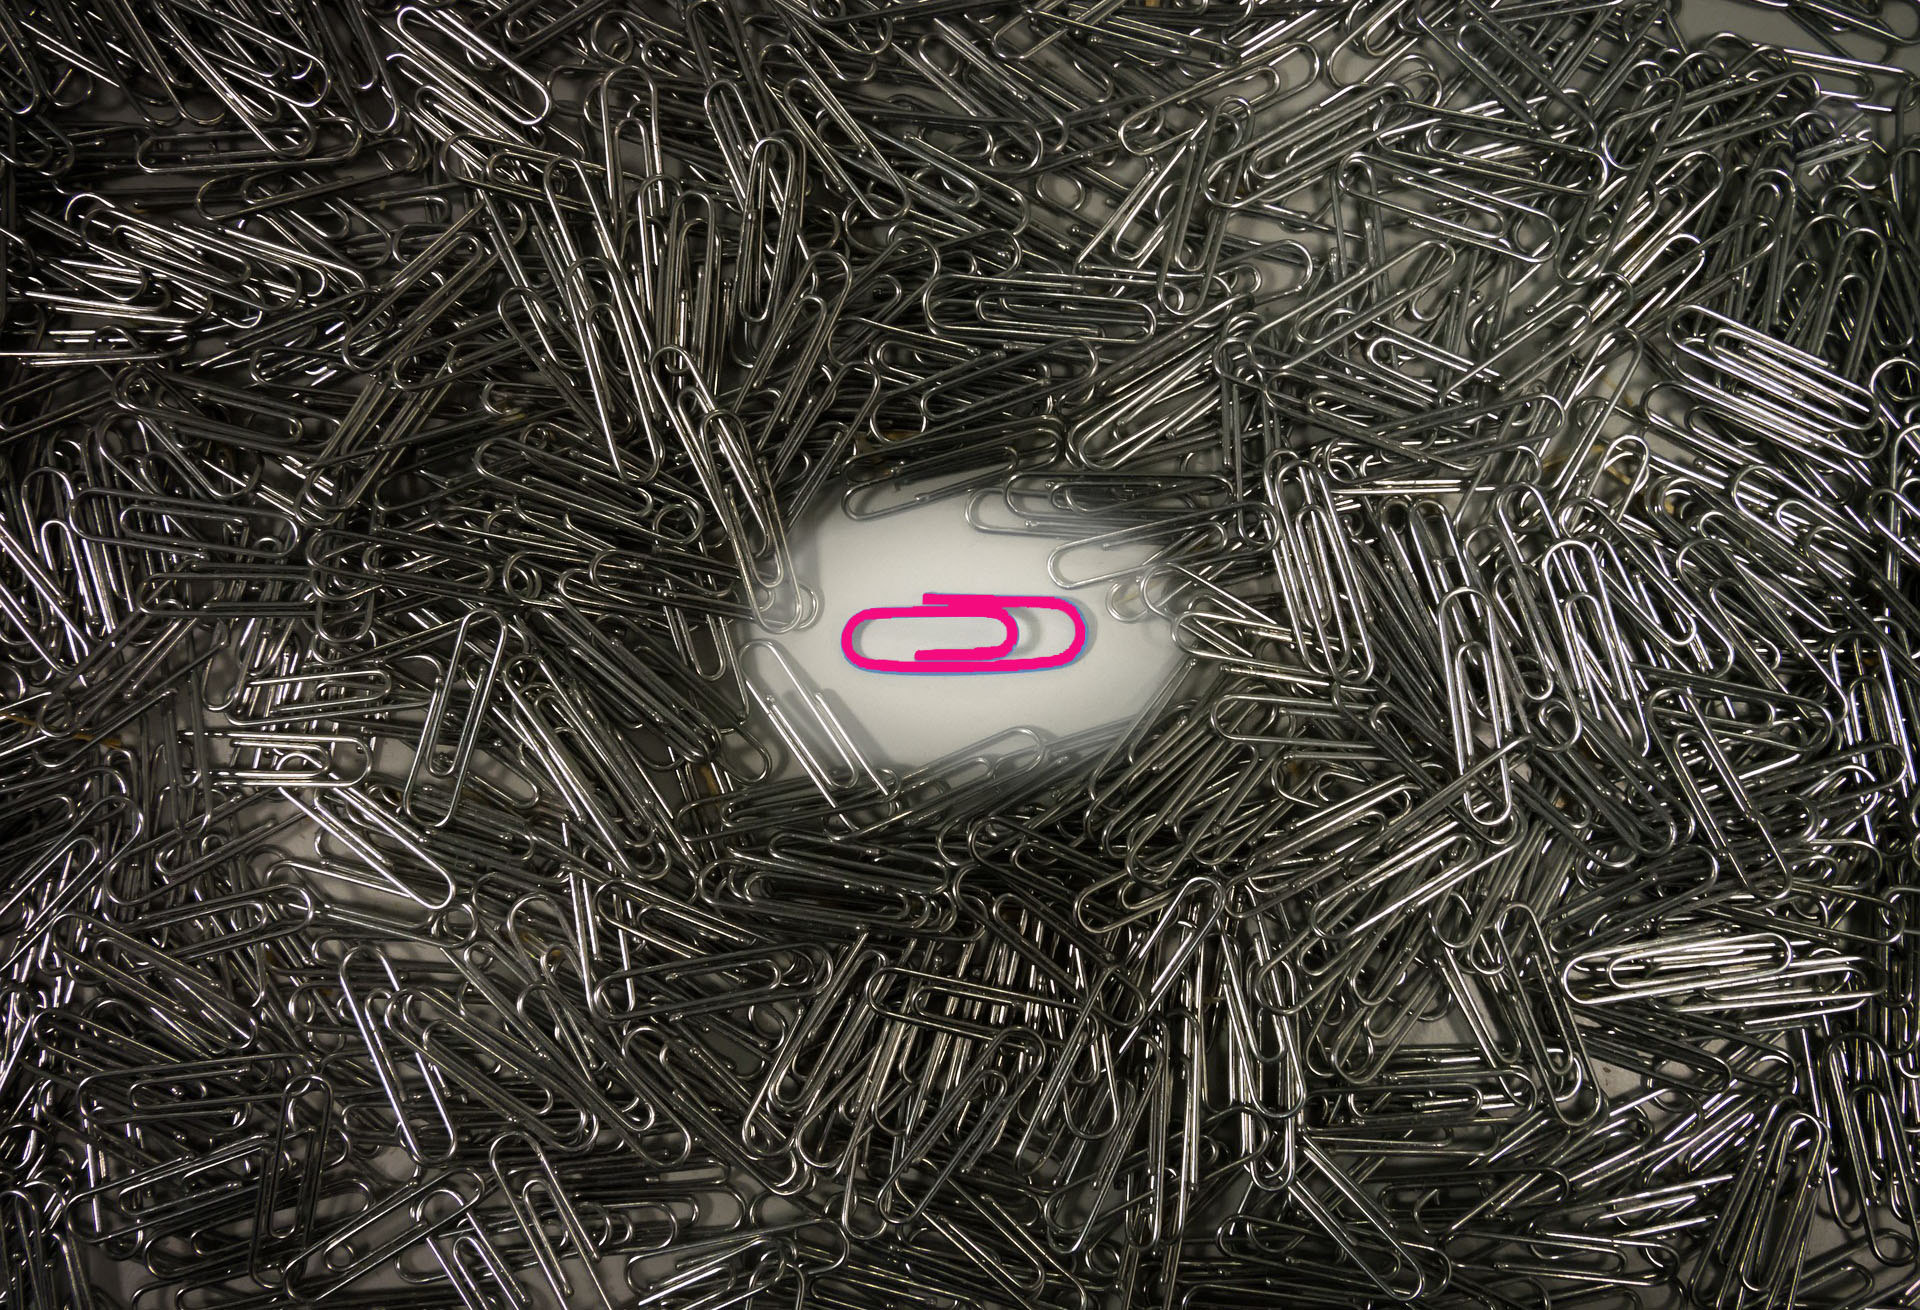 Pink paperclip in a sea of silver paperclips